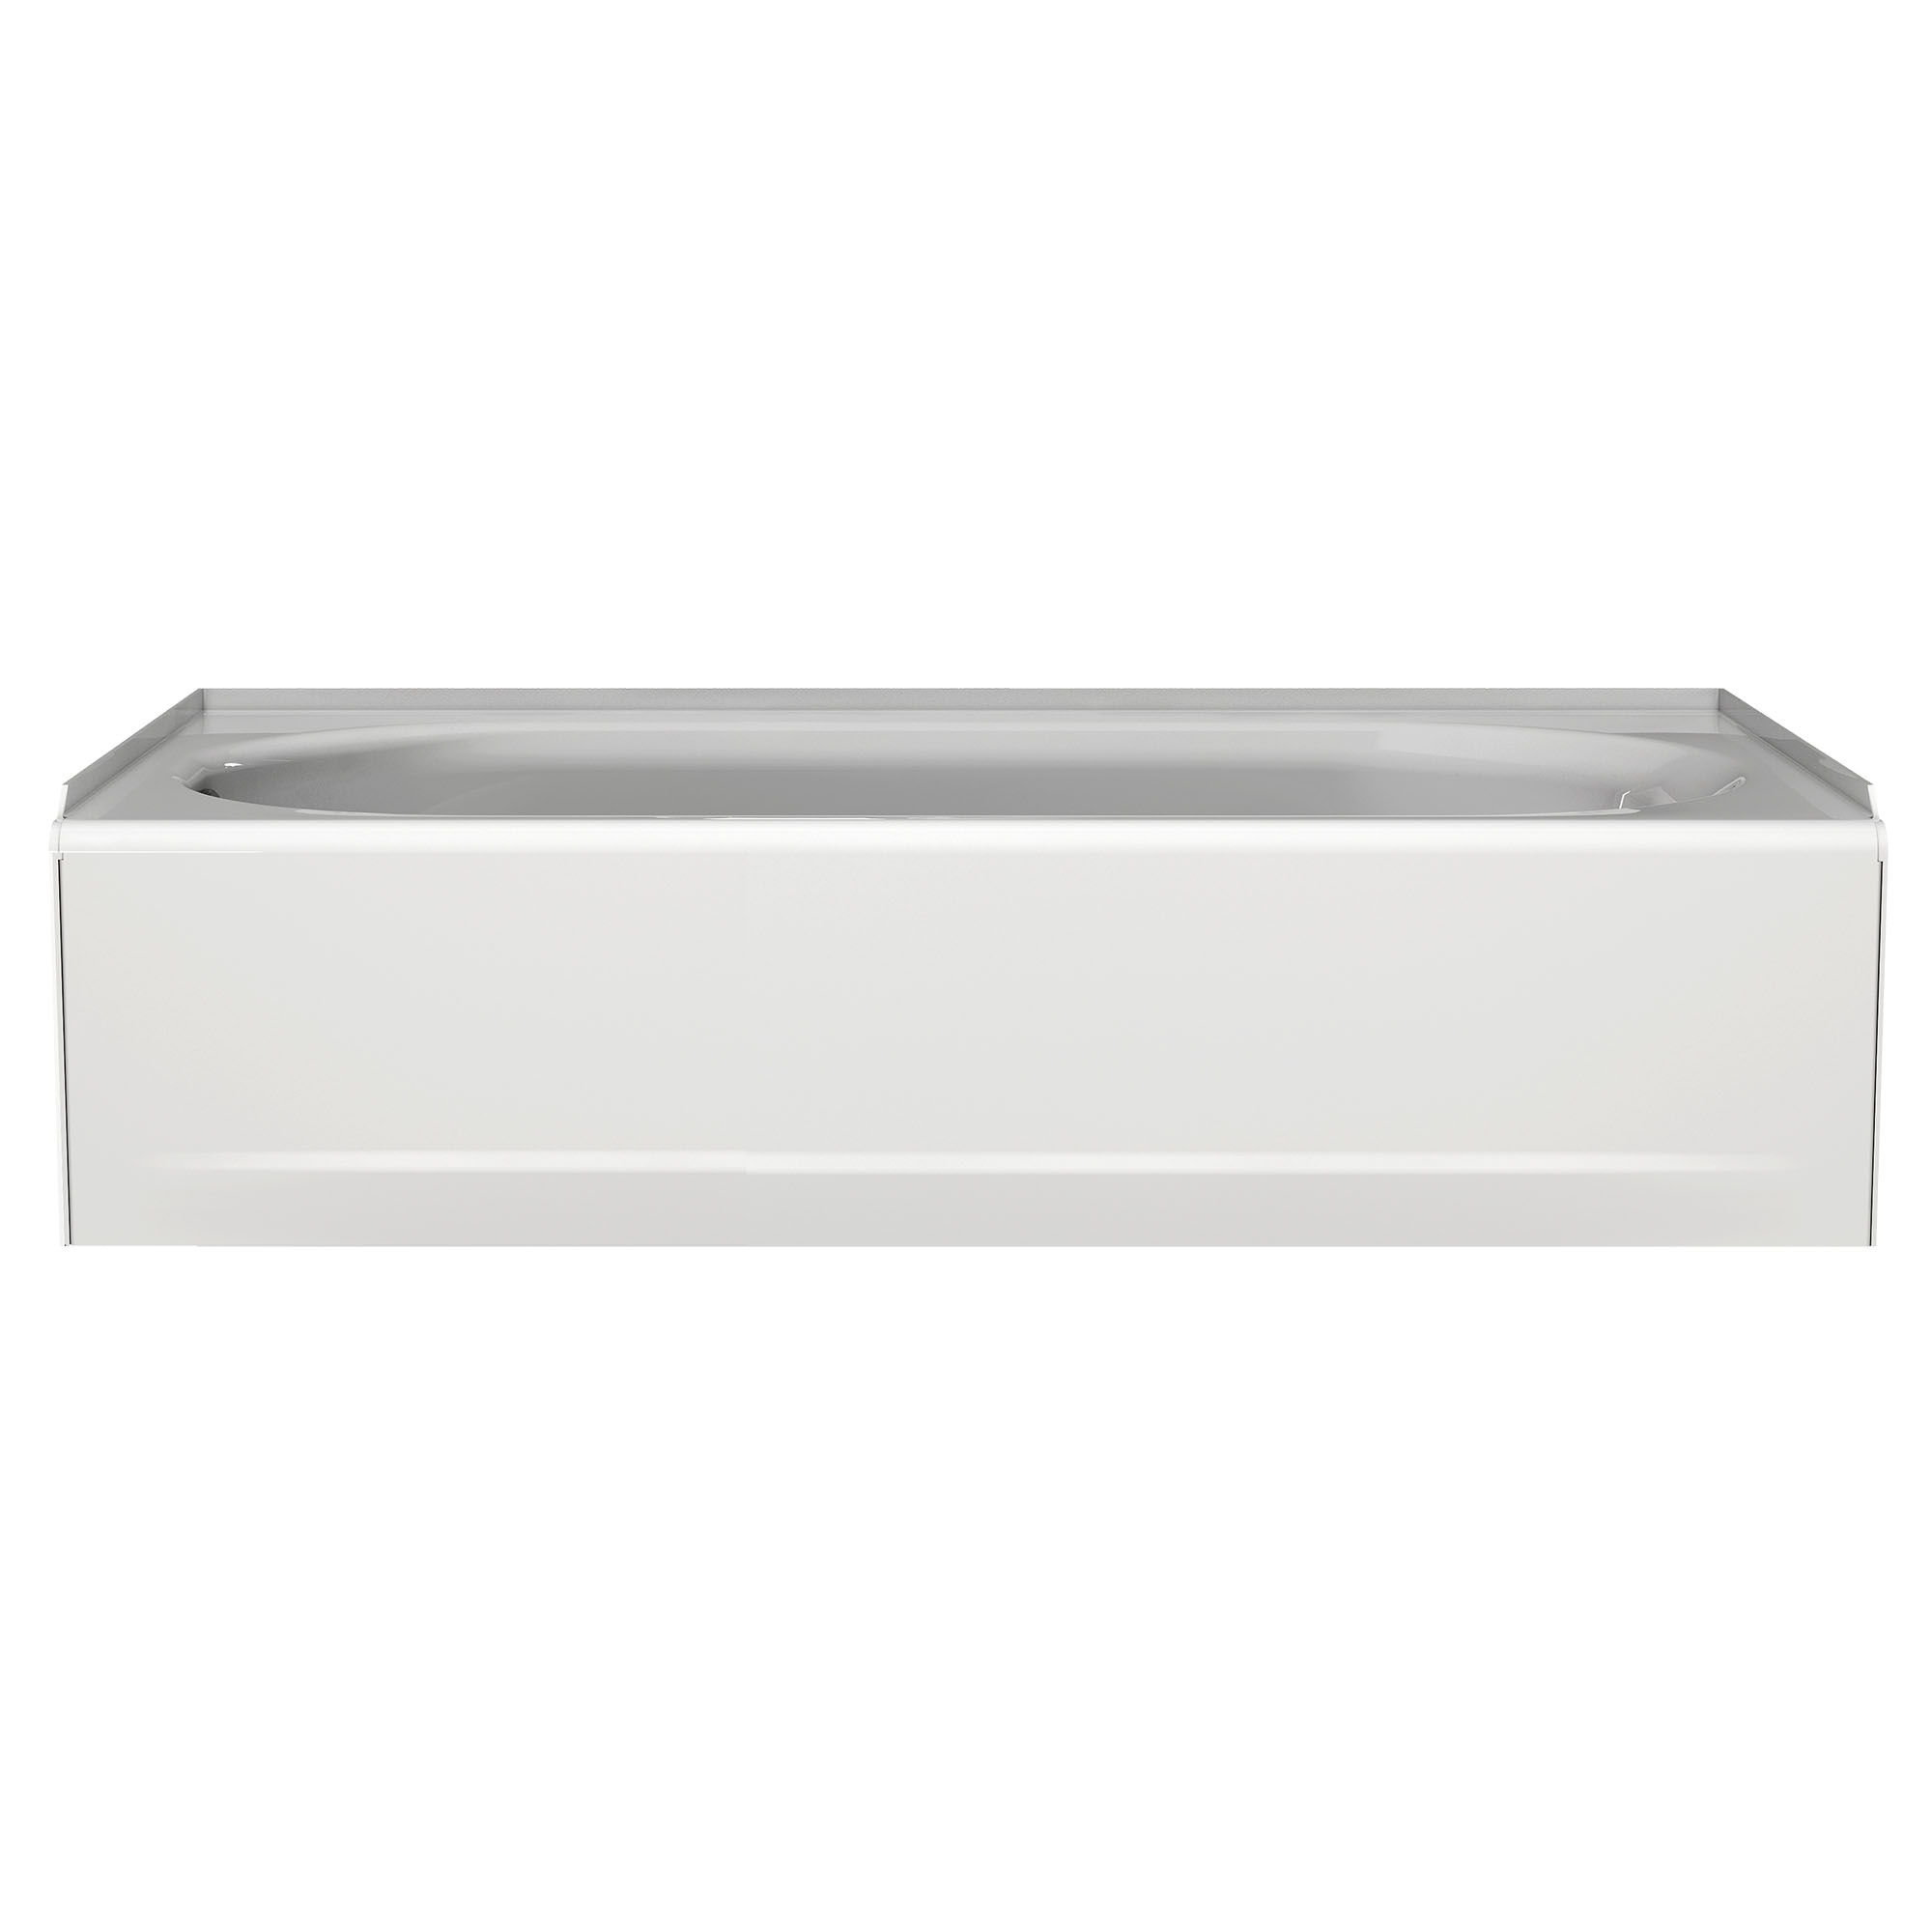 Princeton® Americast® 60 x 34-Inch Integral Apron Bathtub Left-Hand Outlet Luxury Ledge with Integral Drain